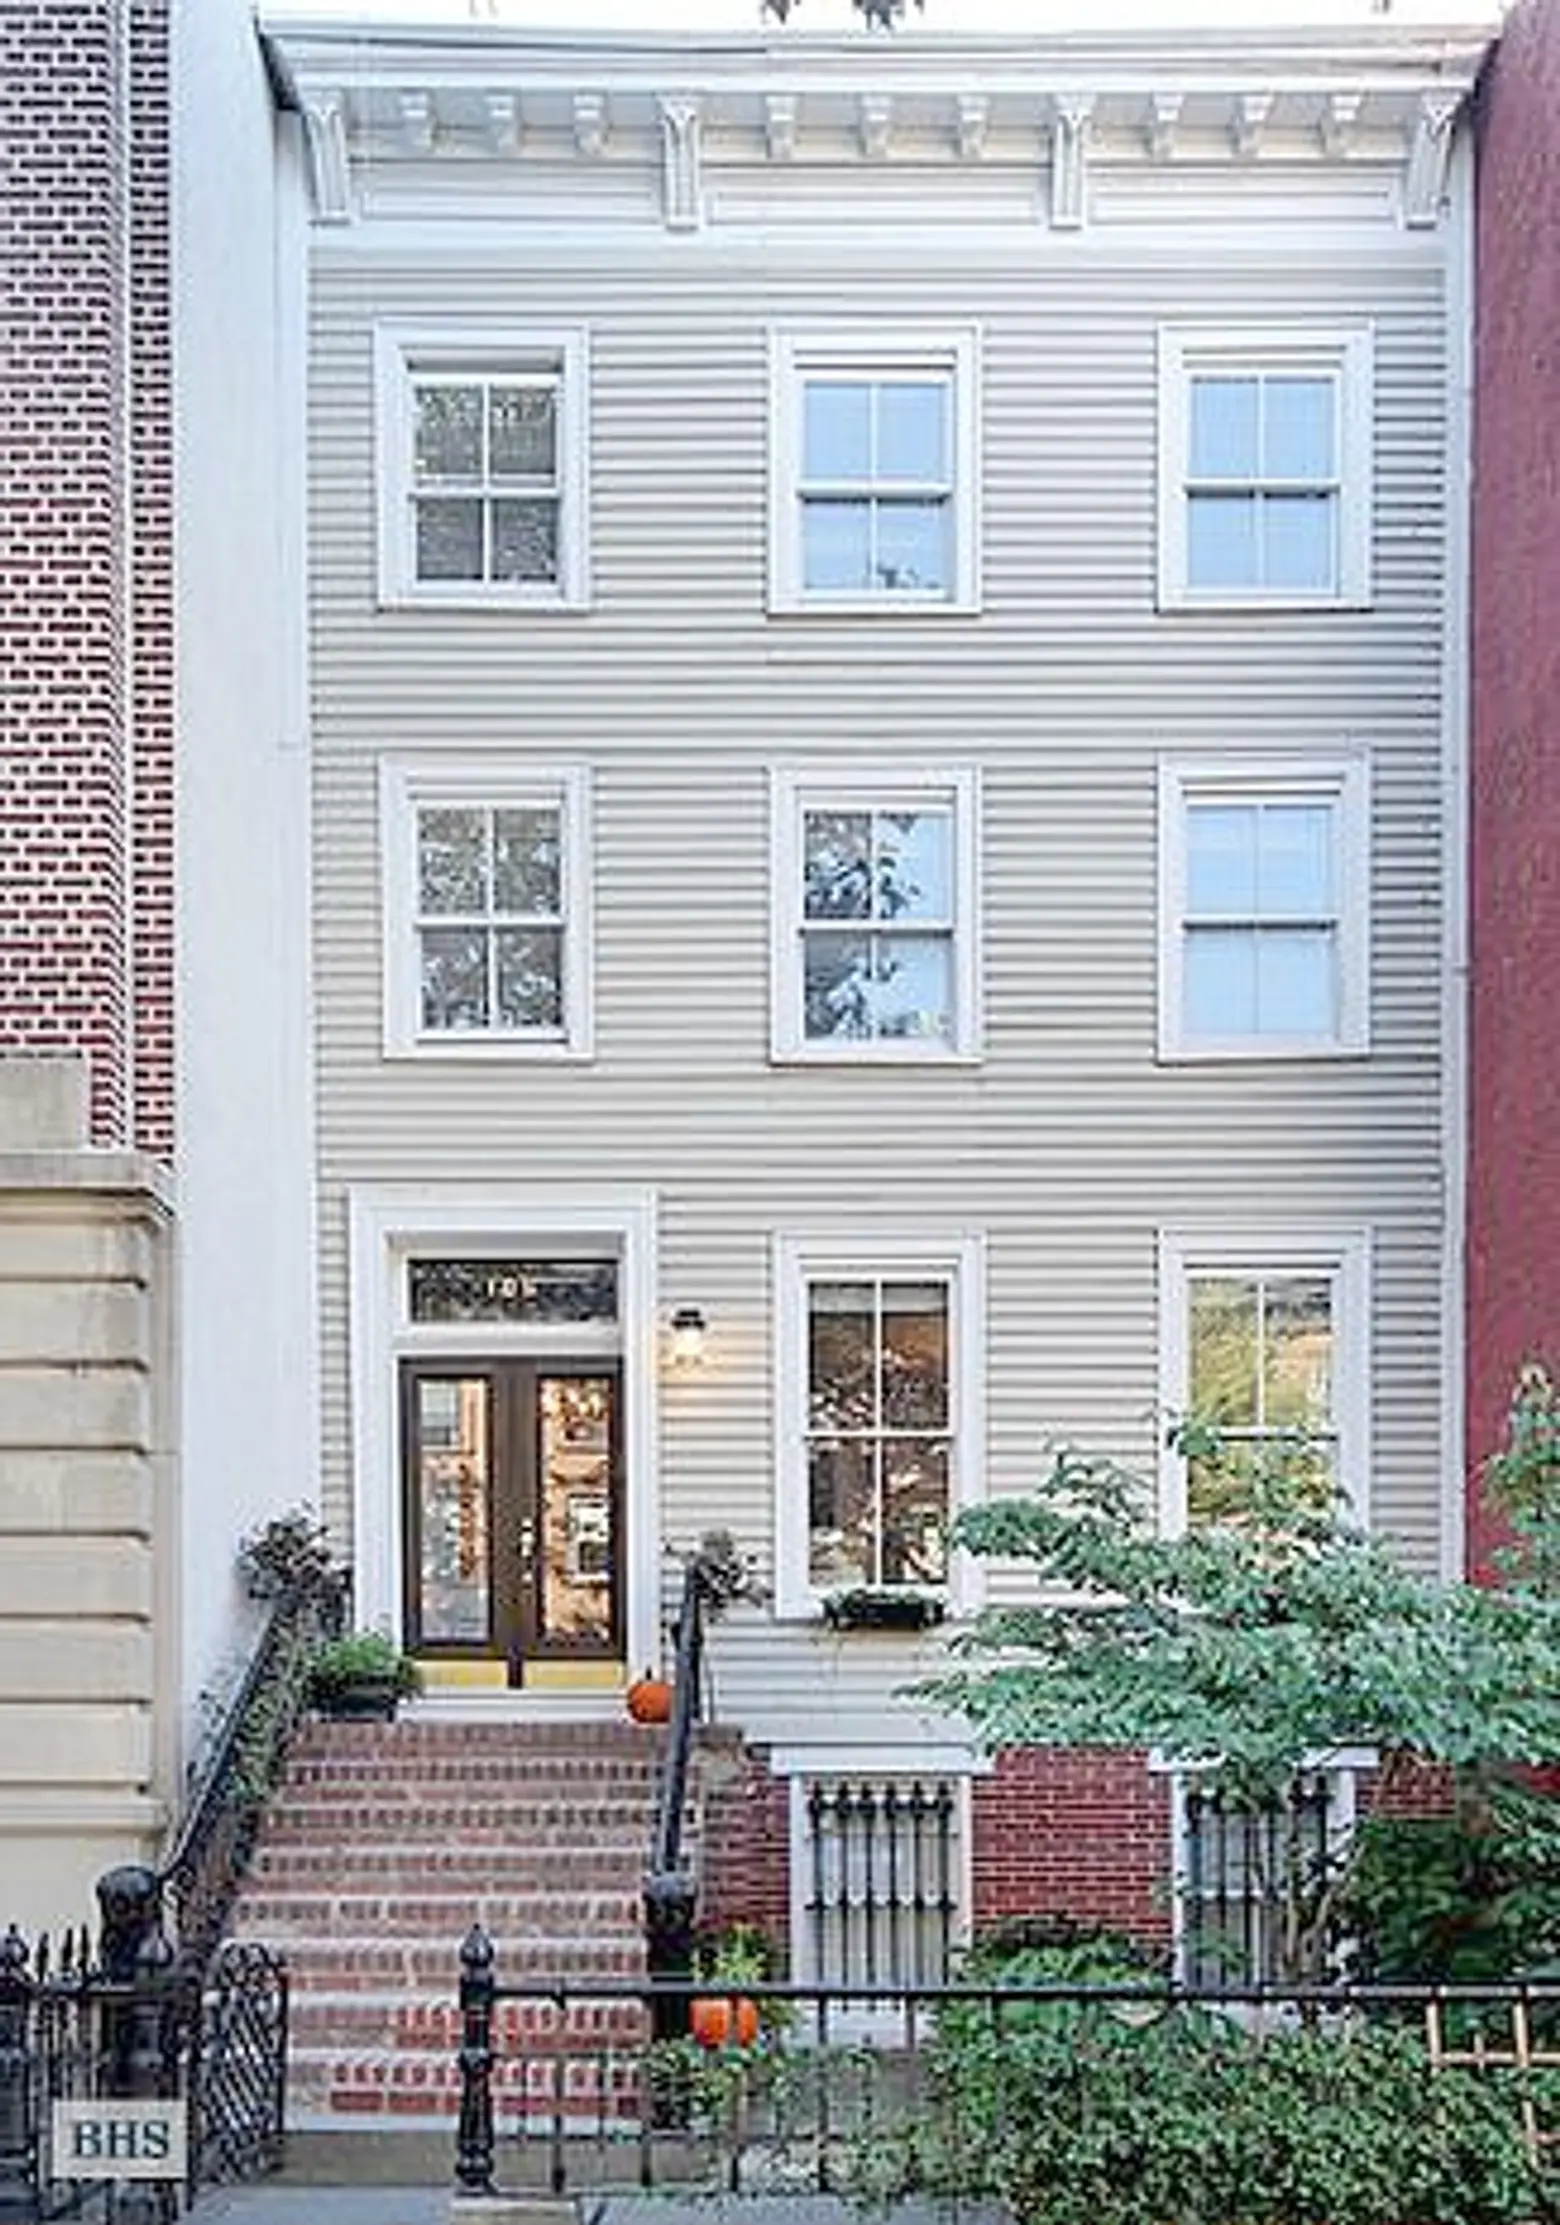 106 Cambridge Place, Clinton Hill, Historic Home, Landmarks, Cool Listing, Townhouse, Clapboard House, Townhouse for rent, rentals